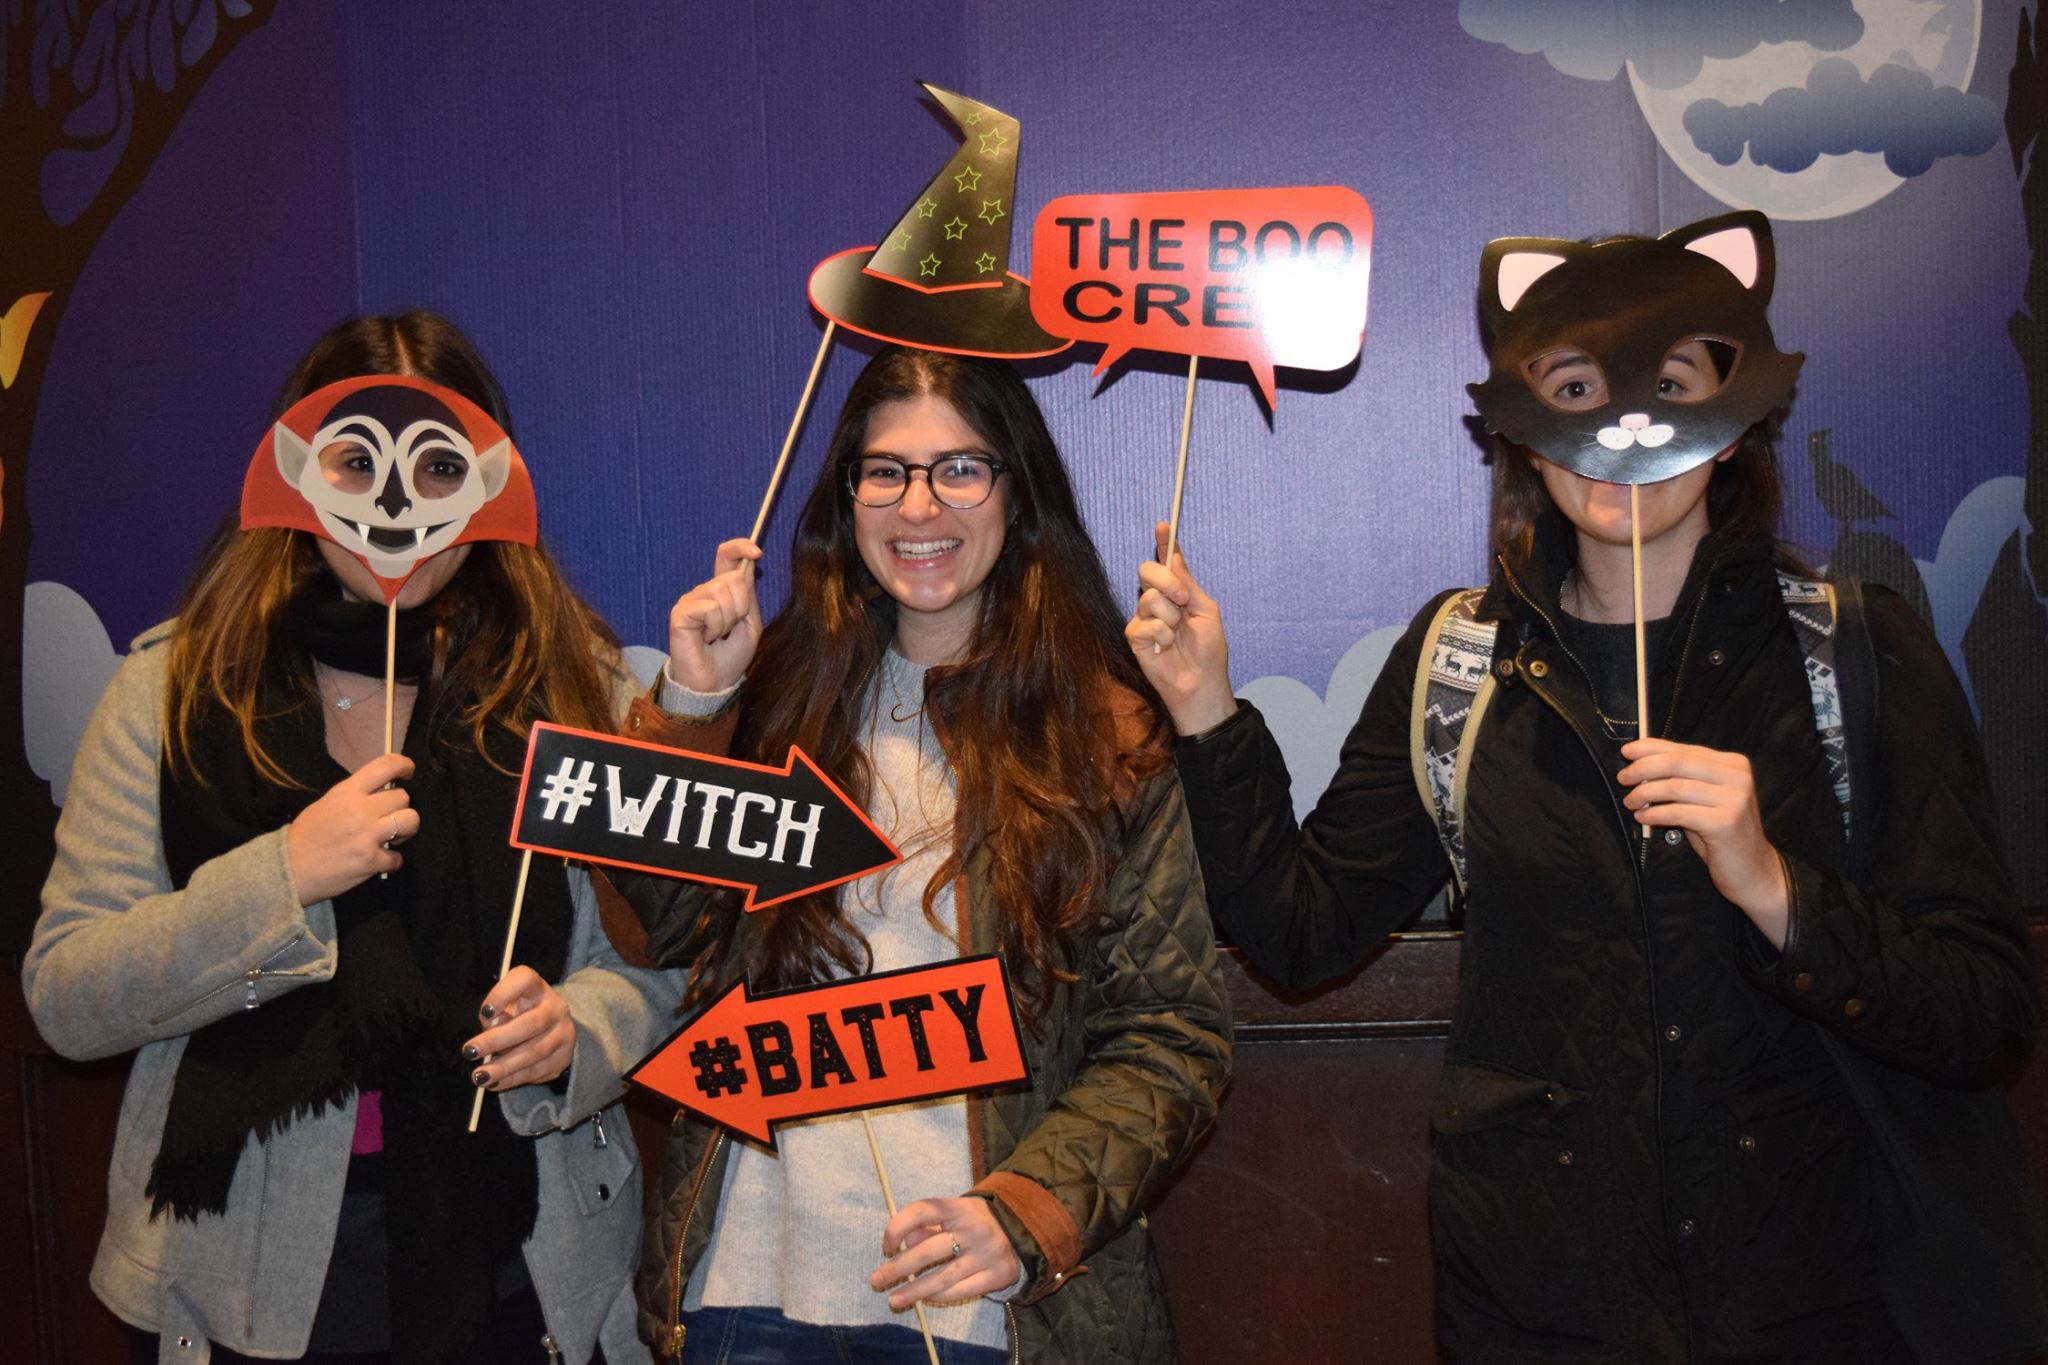 Penn students pose with halloween props in the halloween photo booth